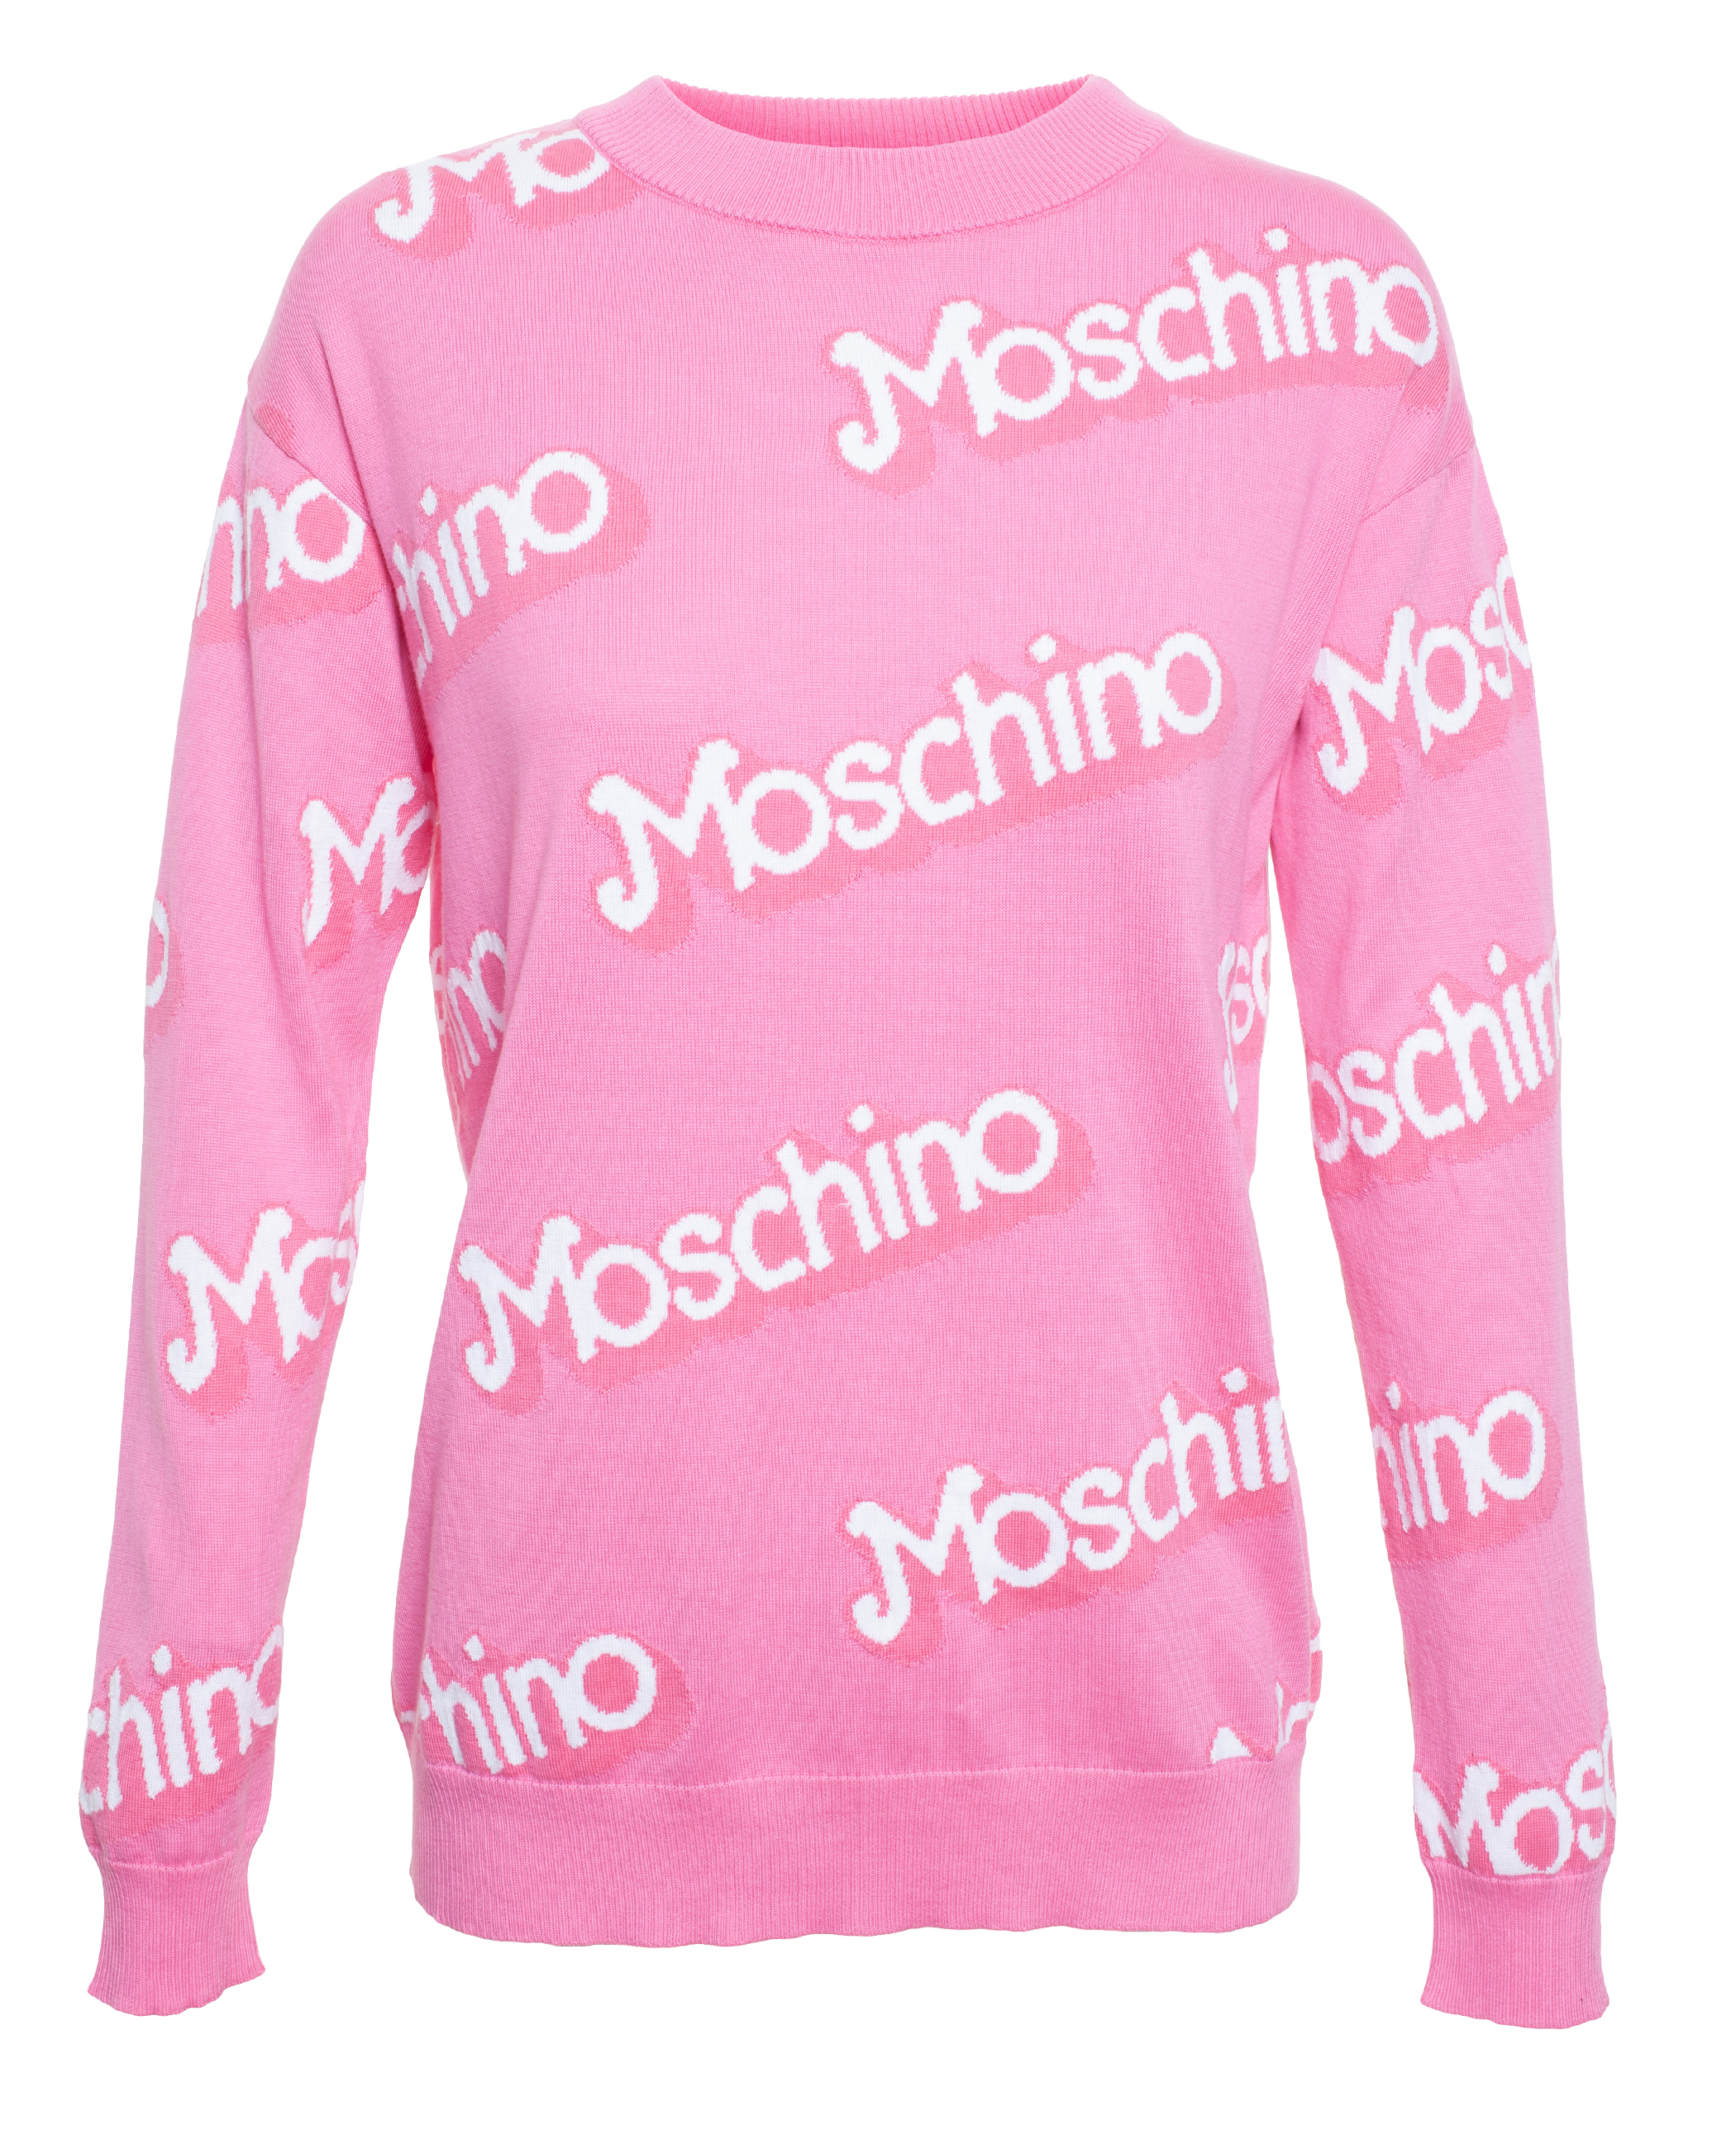 Moschino Barbie Knitted Sweater in Pink